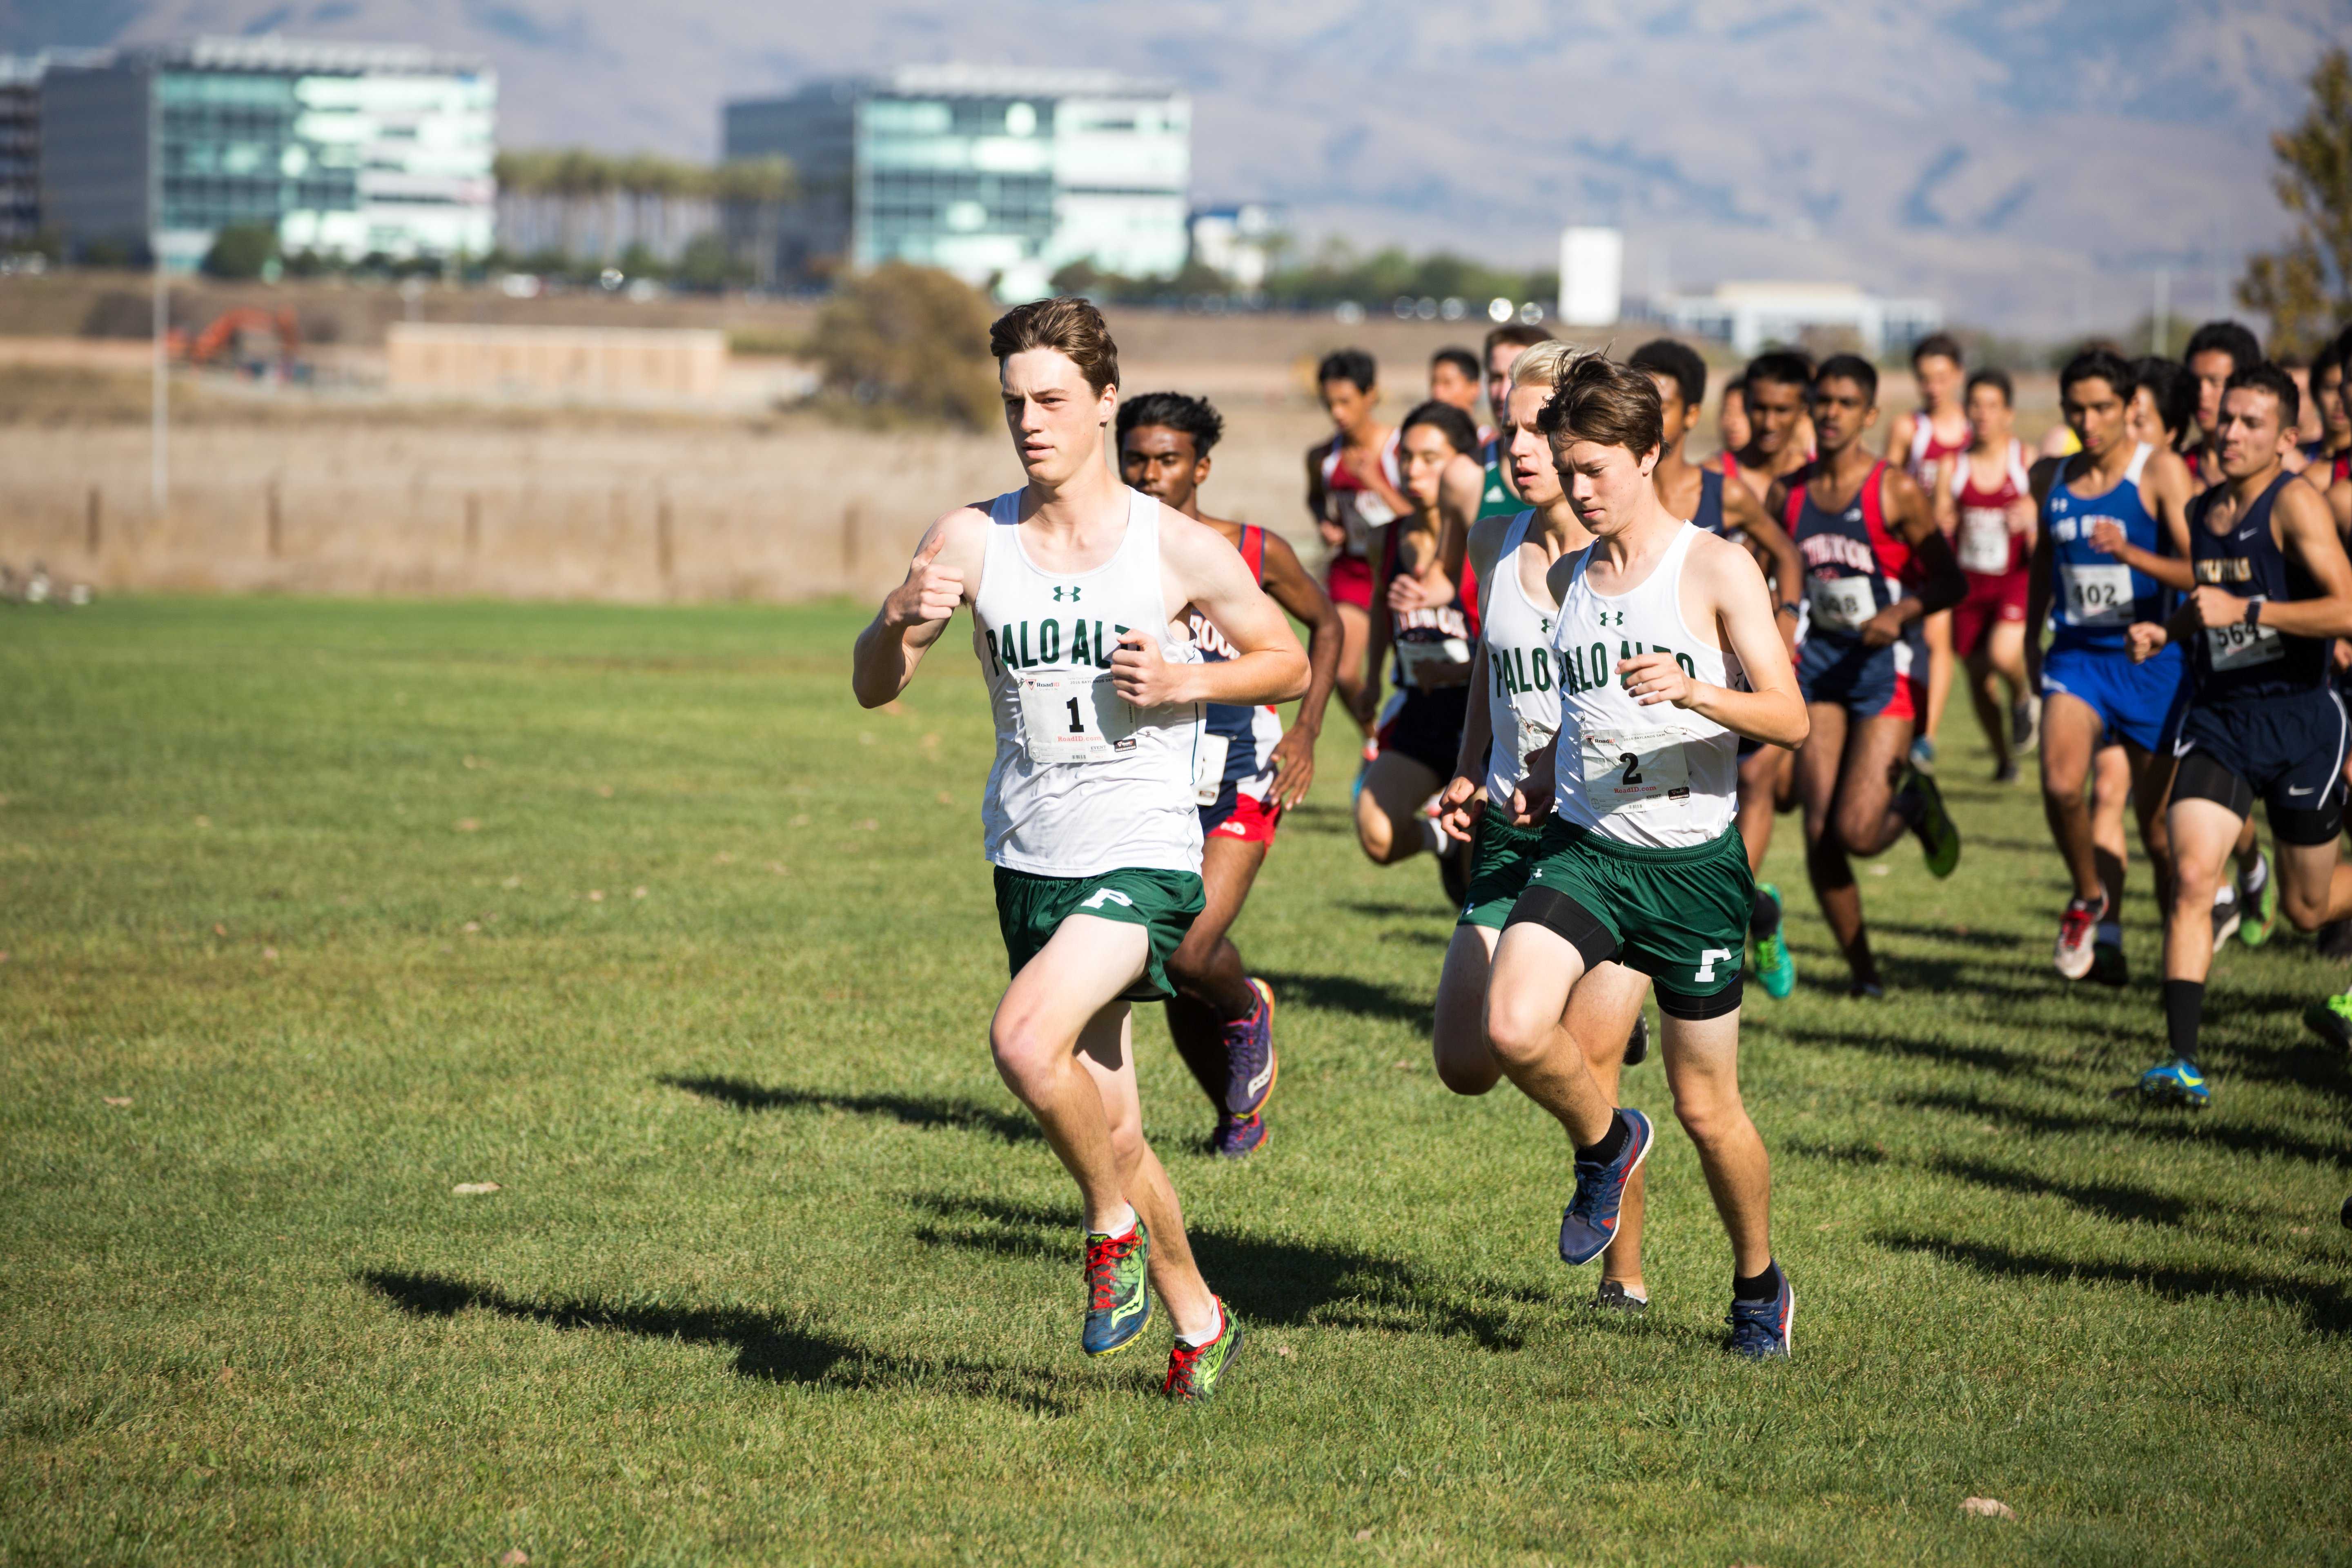 Cross country remains on track for CCS meet The Campanile